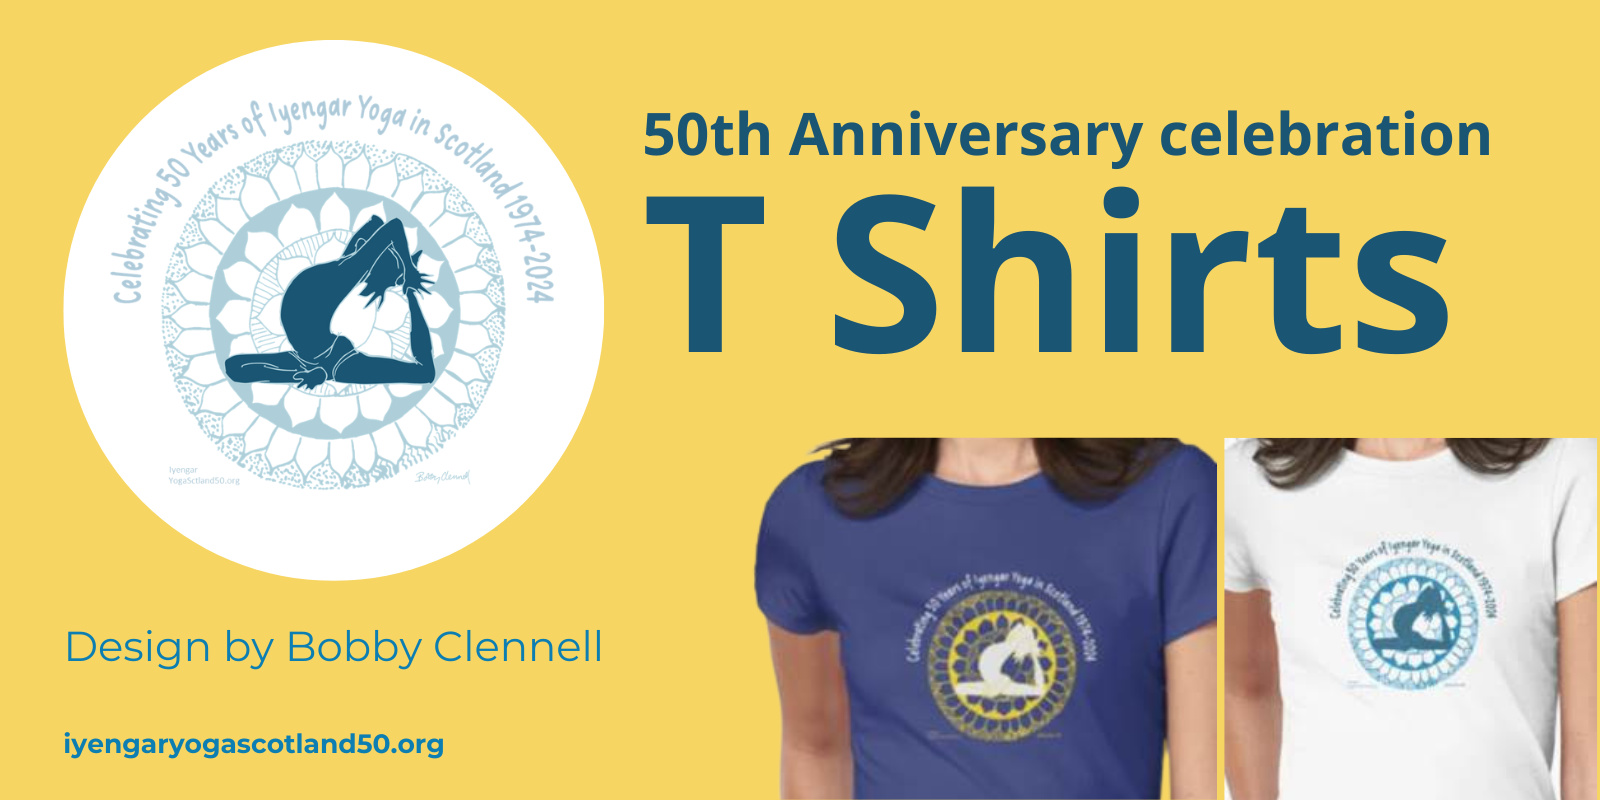 50th anniversary T shirts now available 